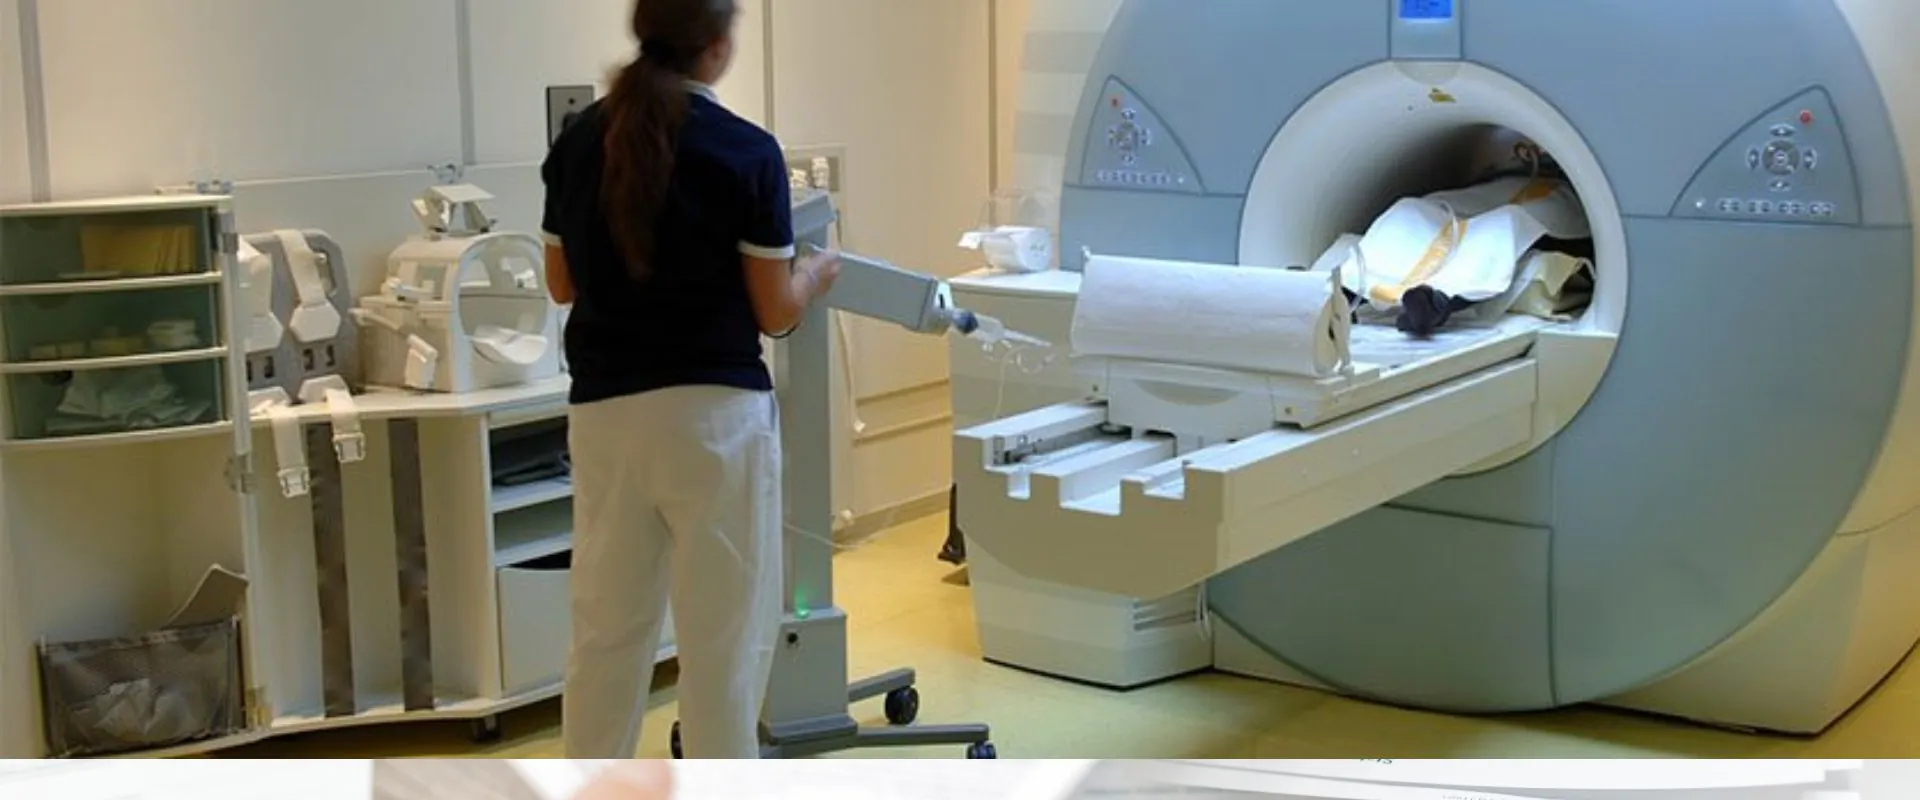 Analysis of MRI Systems Market in the US